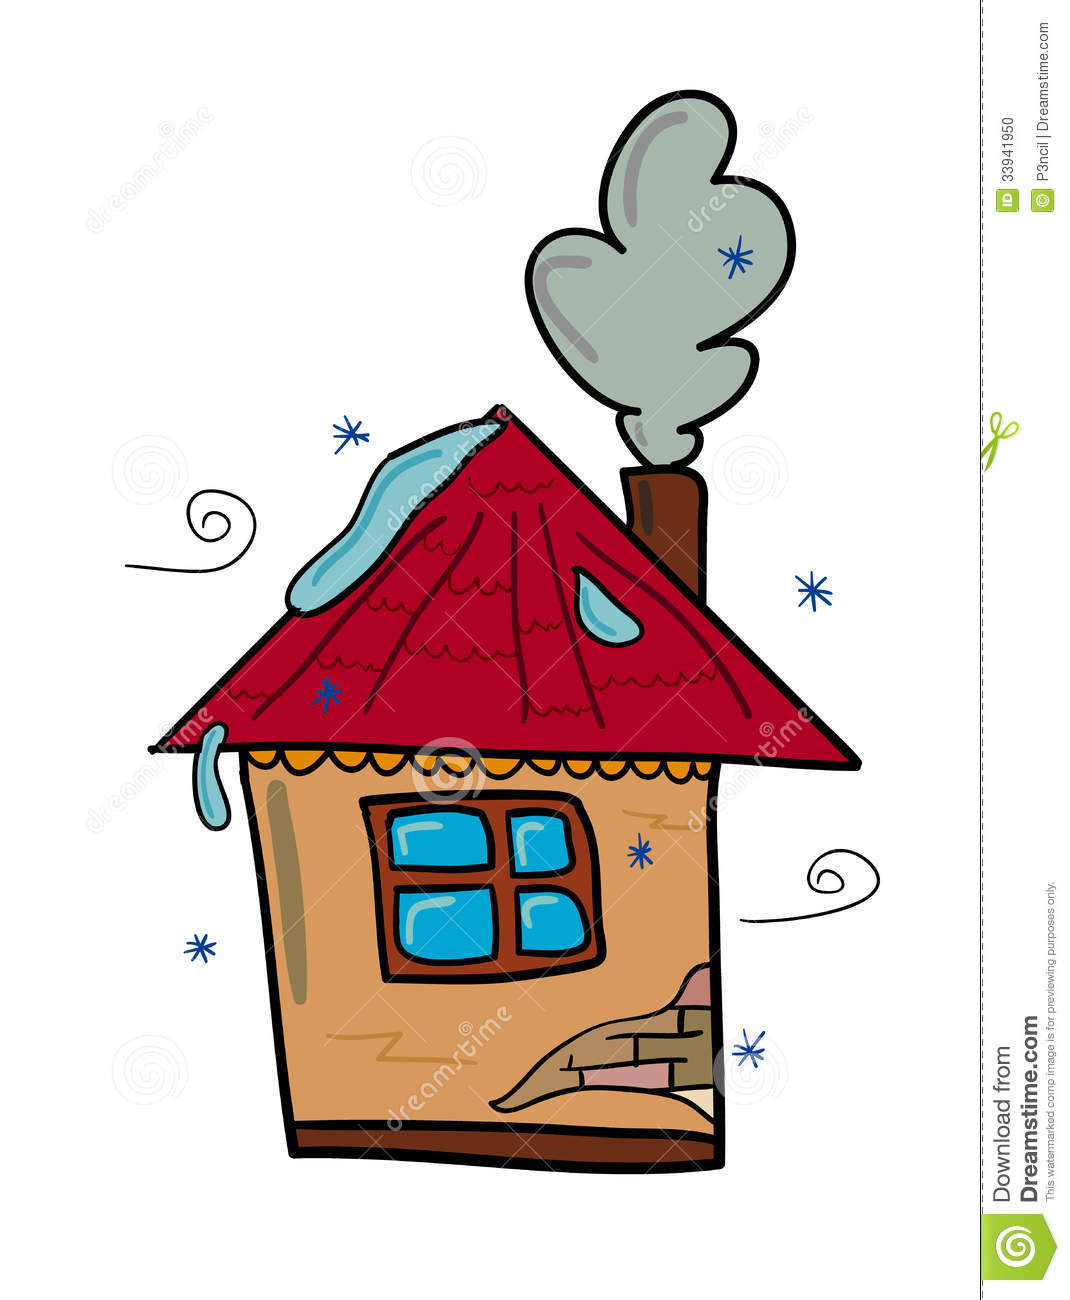 Chimney Smoke Clipart Big House With A Chimney And A